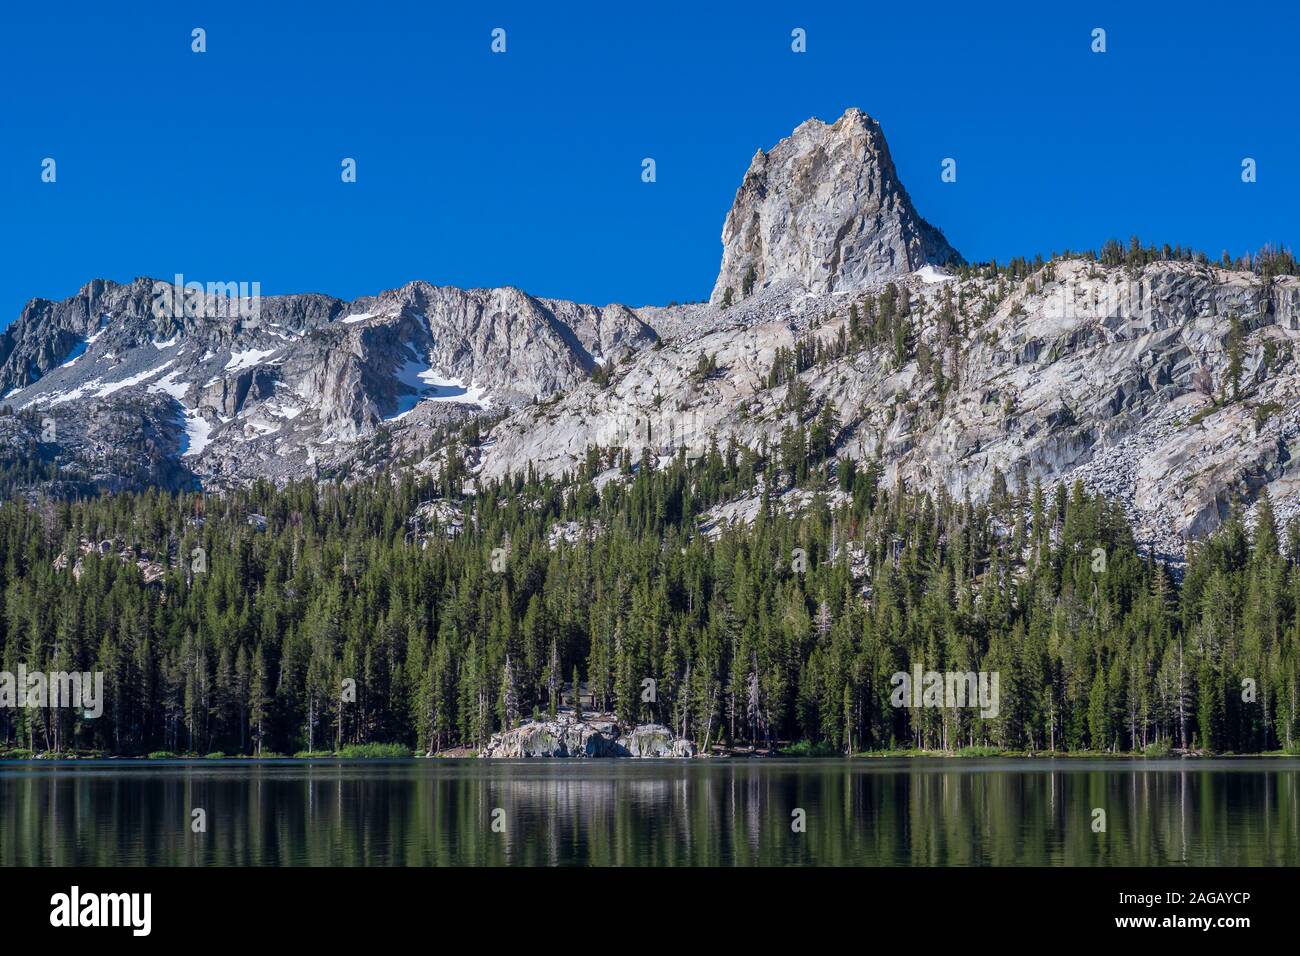 Crystal Crag and the eastern Sierra from Lake George, Mammoth Lakes, California. Stock Photo